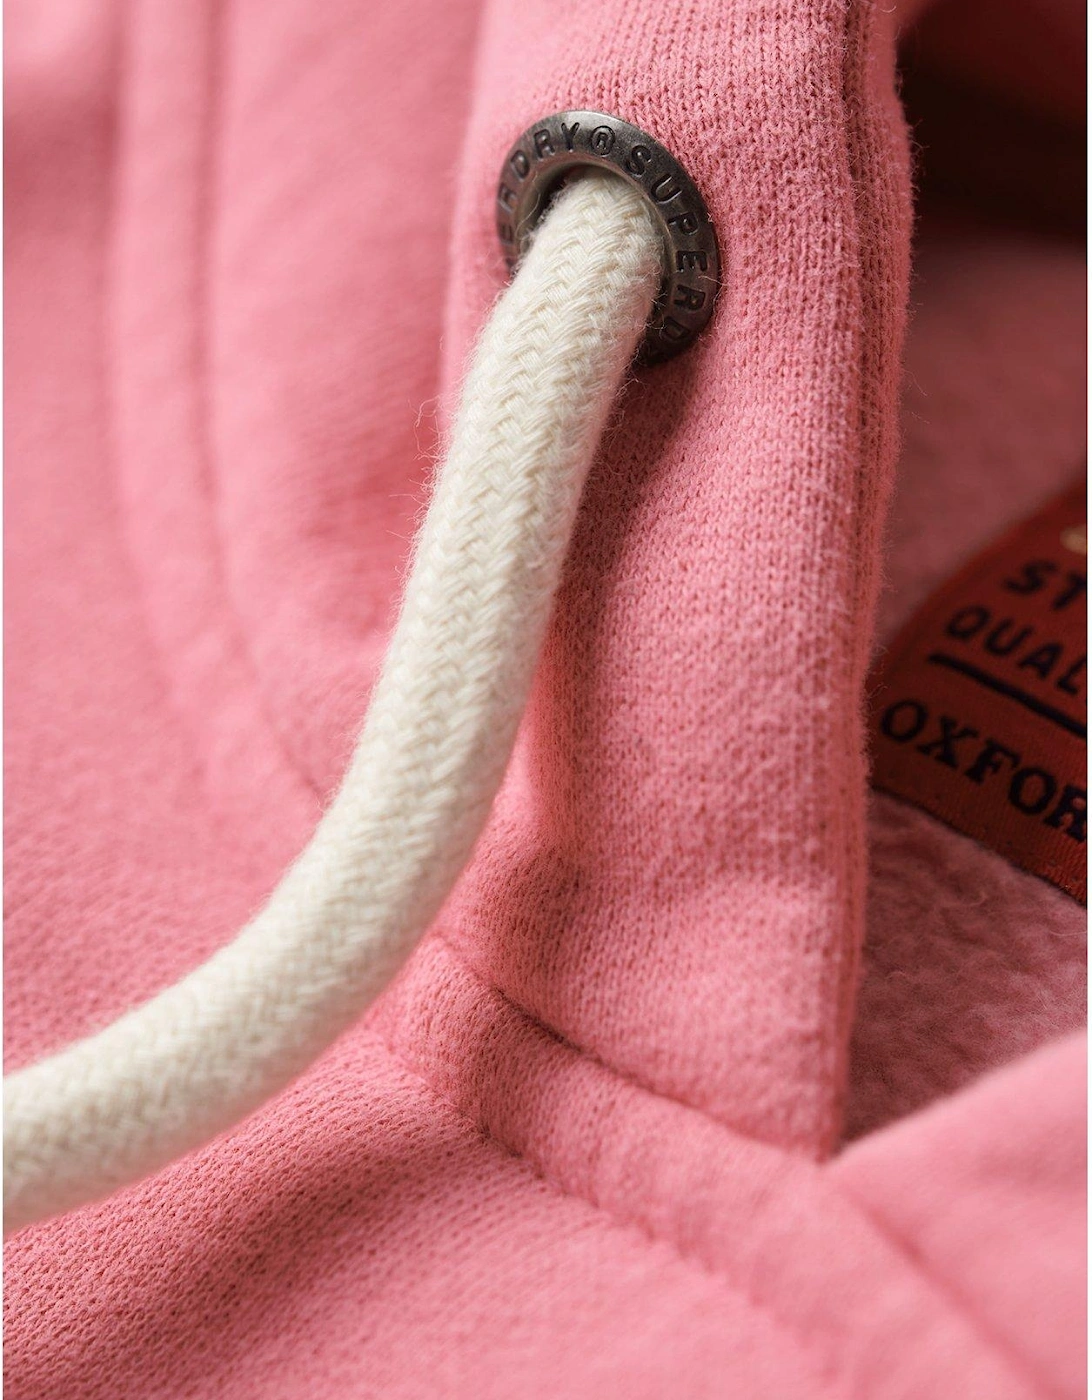 Archive Script Graphic Hoodie - Pink